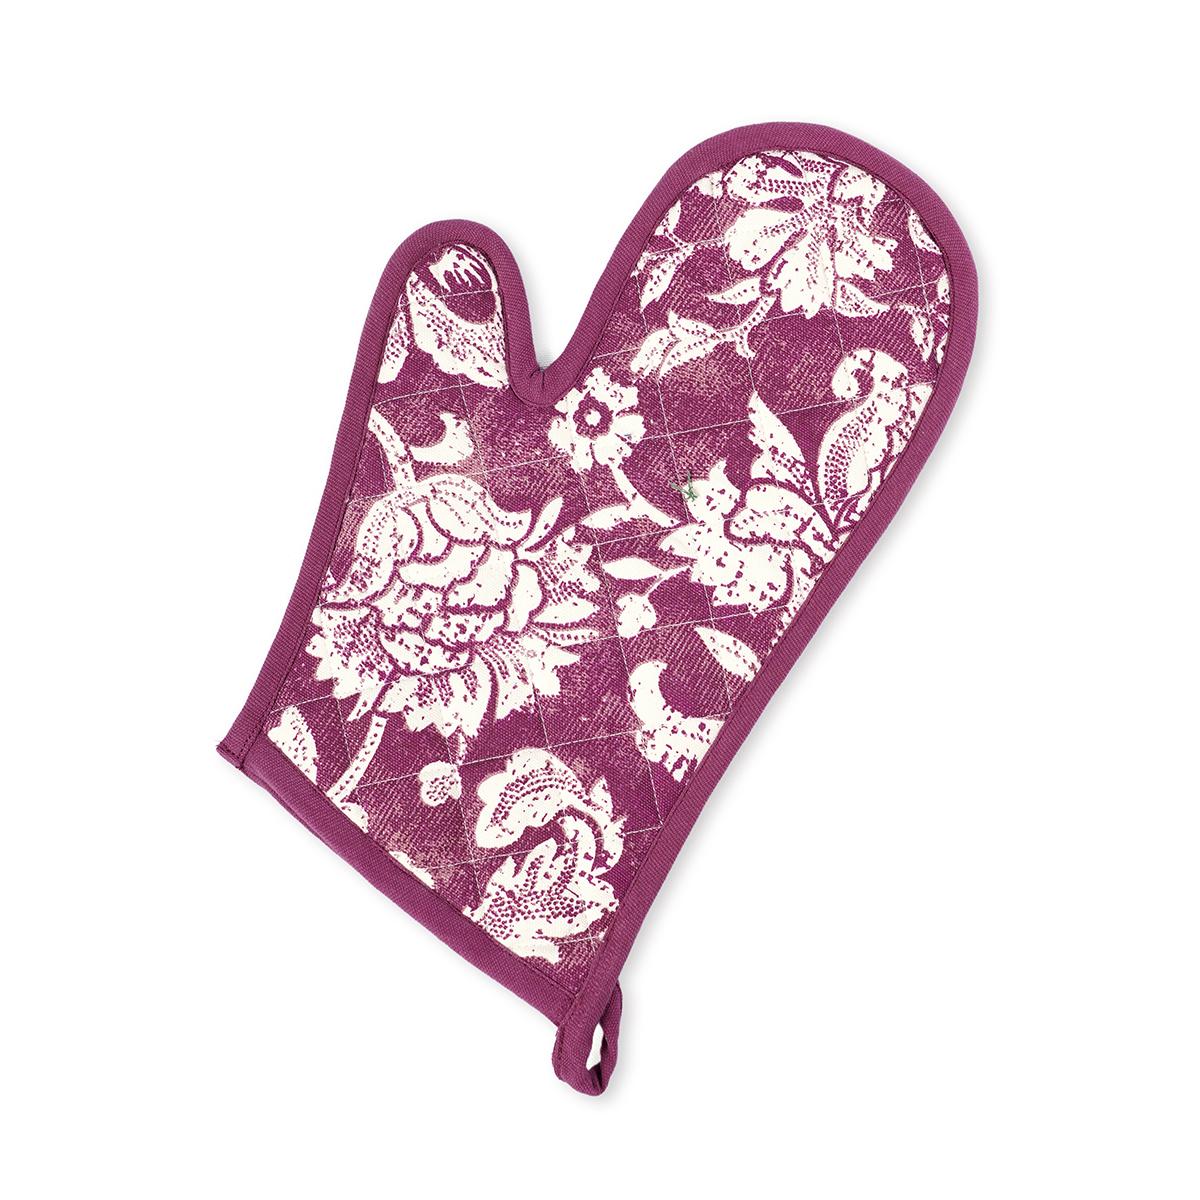 DOMINOTERIE Plum bold floral print Pot holder and Glove, kitchen accessory, 100% cotton, view options